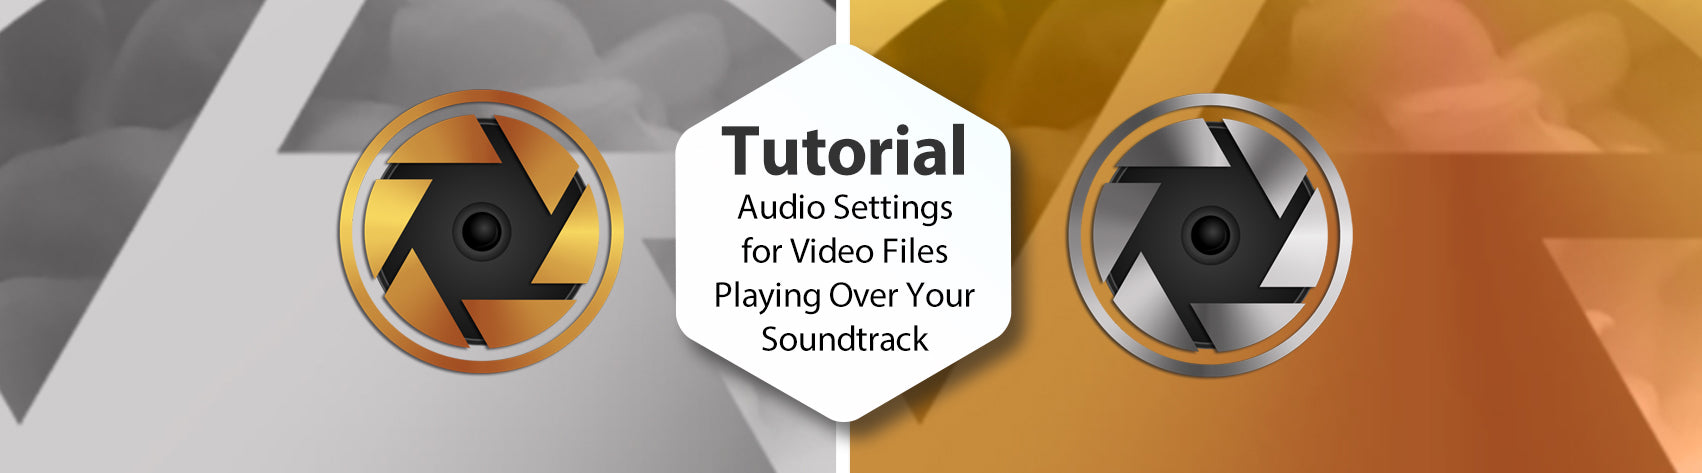 Tutorial - Audio Settings for Video Files and Soundtrack